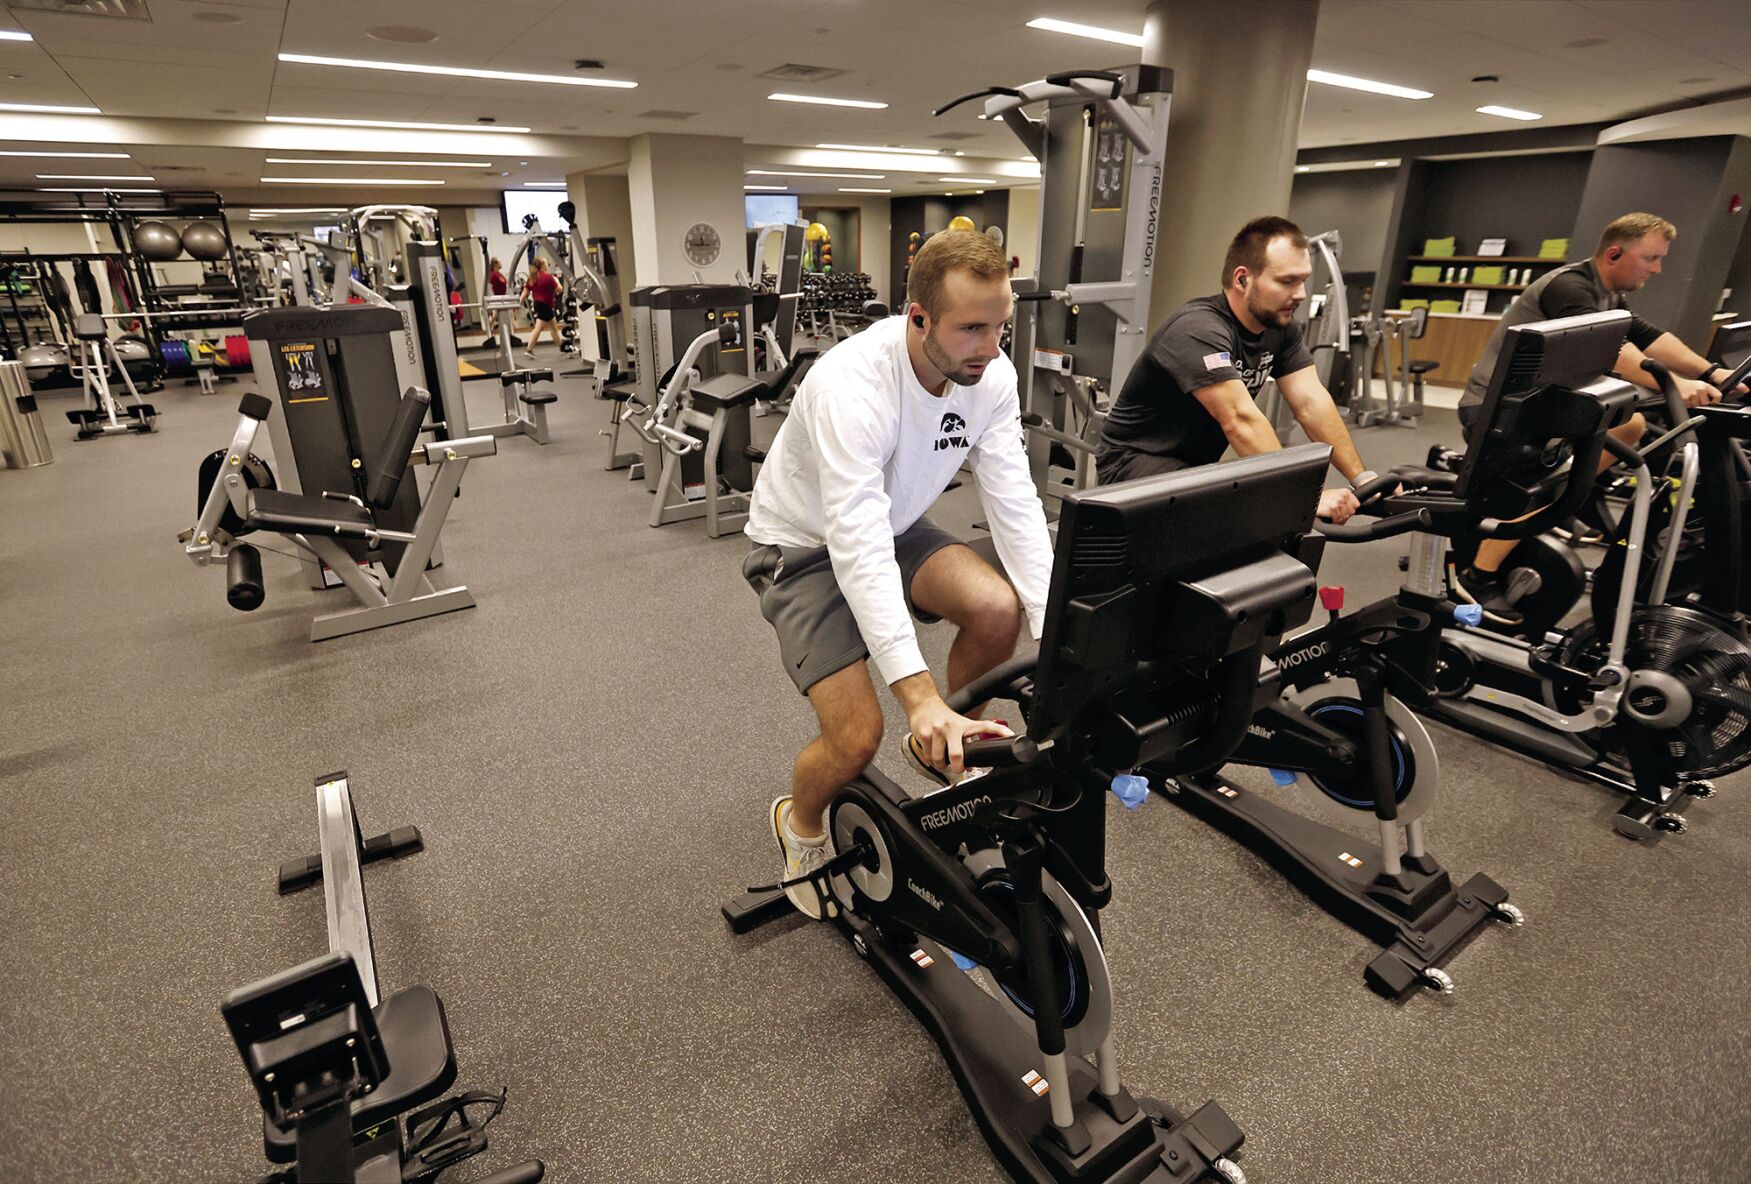 Brock Hillers (from left), Kyle Cluskey and Aaron Wulfekuhle, all employees with Cottingham & Butler, workout in a fitness center shared by Cottingham & Butler and HTLF at the Roshek Building in Dubuque on Tuesday, Sept. 26, 2023.    PHOTO CREDIT: JESSICA REILLY